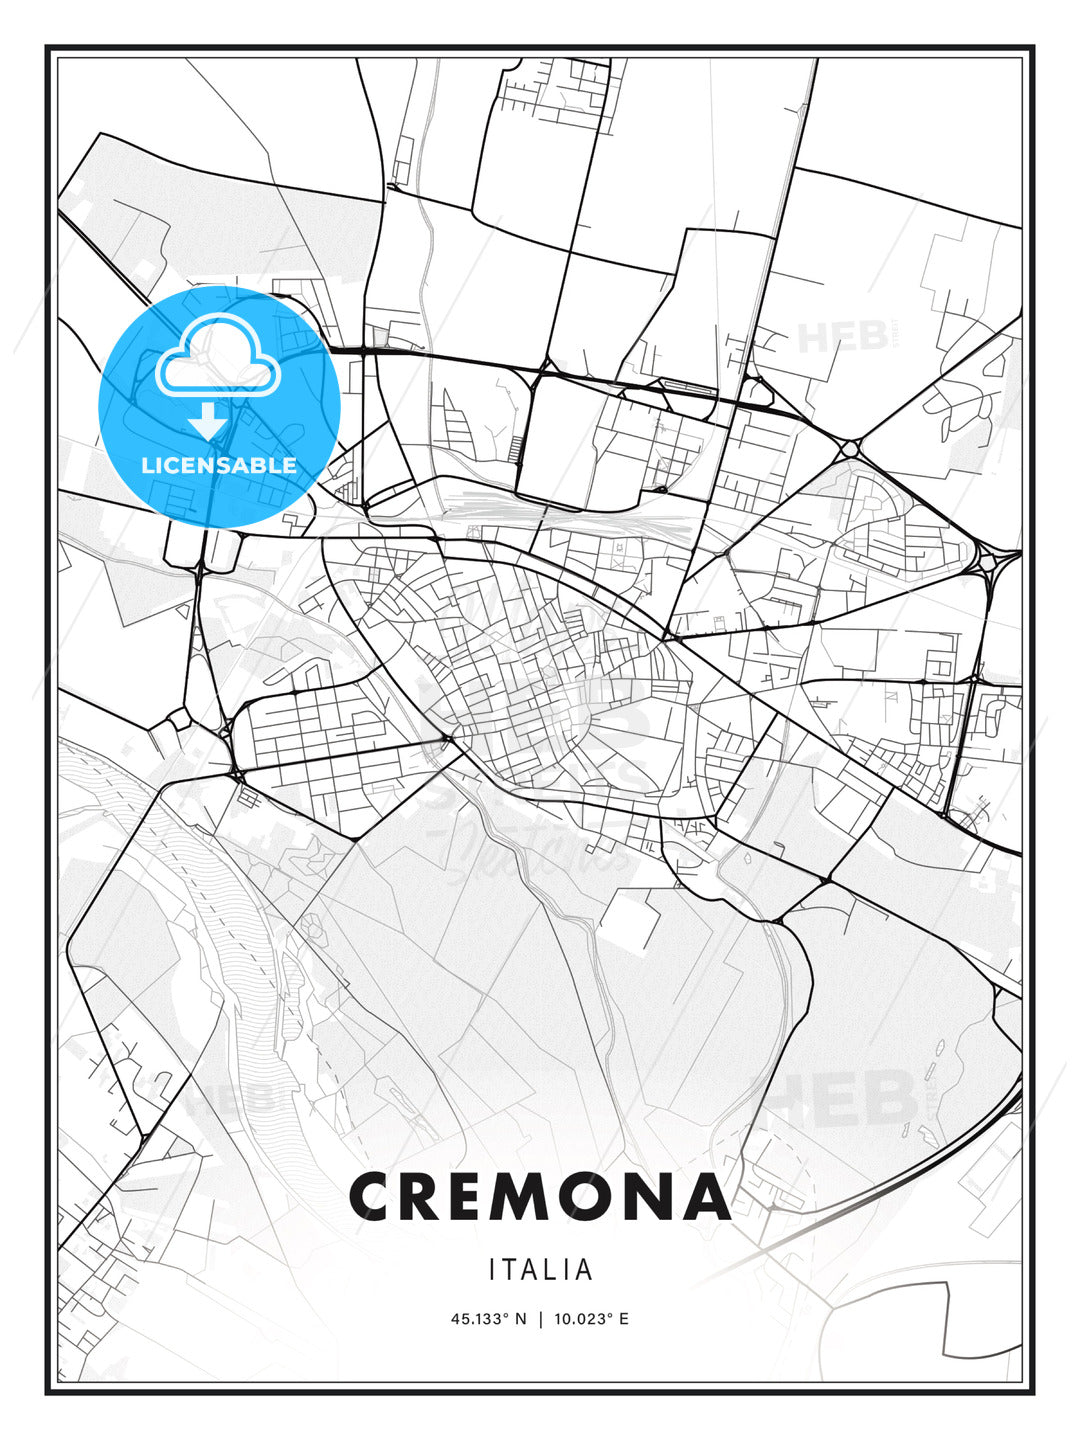 Cremona, Italy, Modern Print Template in Various Formats - HEBSTREITS Sketches